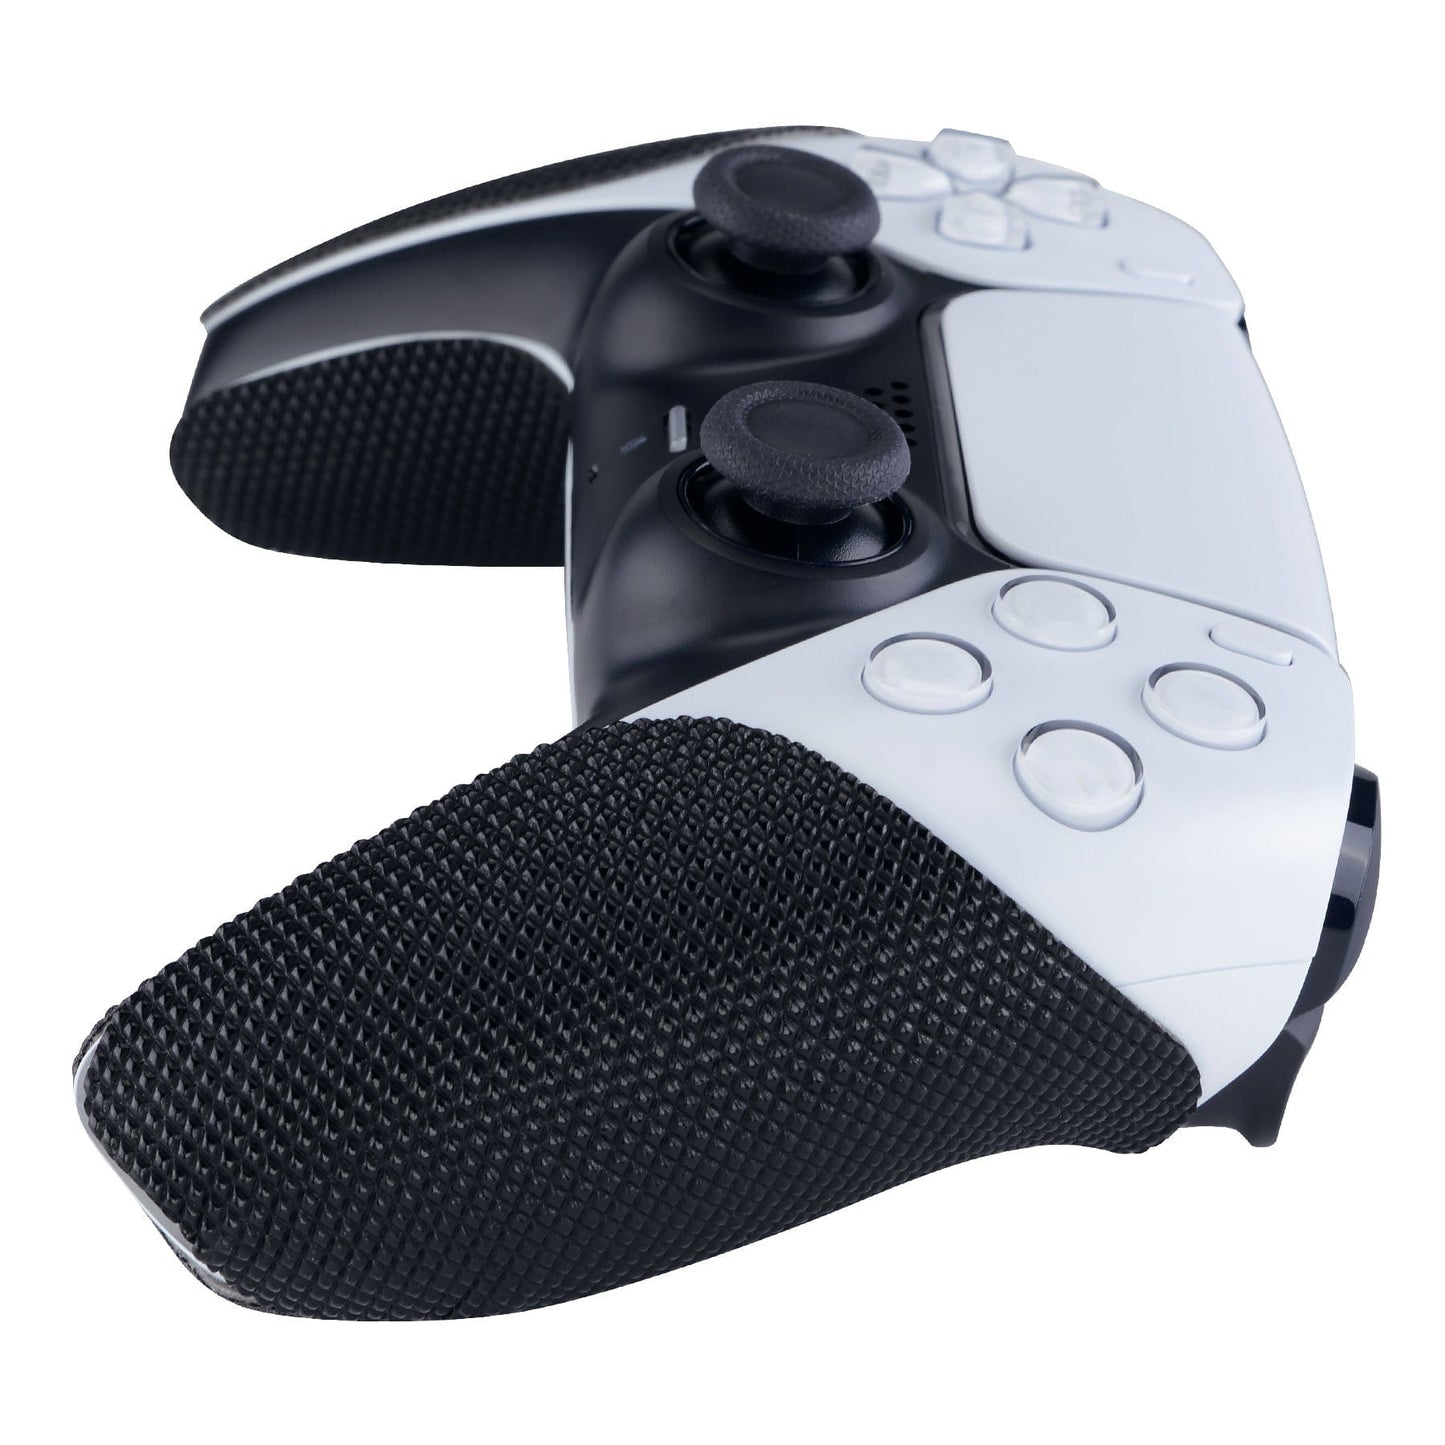 PlayVital Anti-Skid Sweat-Absorbent Controller Grip for PlayStation 5 Controller, Professional Textured Soft Rubber Pads Handle Grips for PS5 Controller - Diamond Grain - PFPJ020 PlayVital